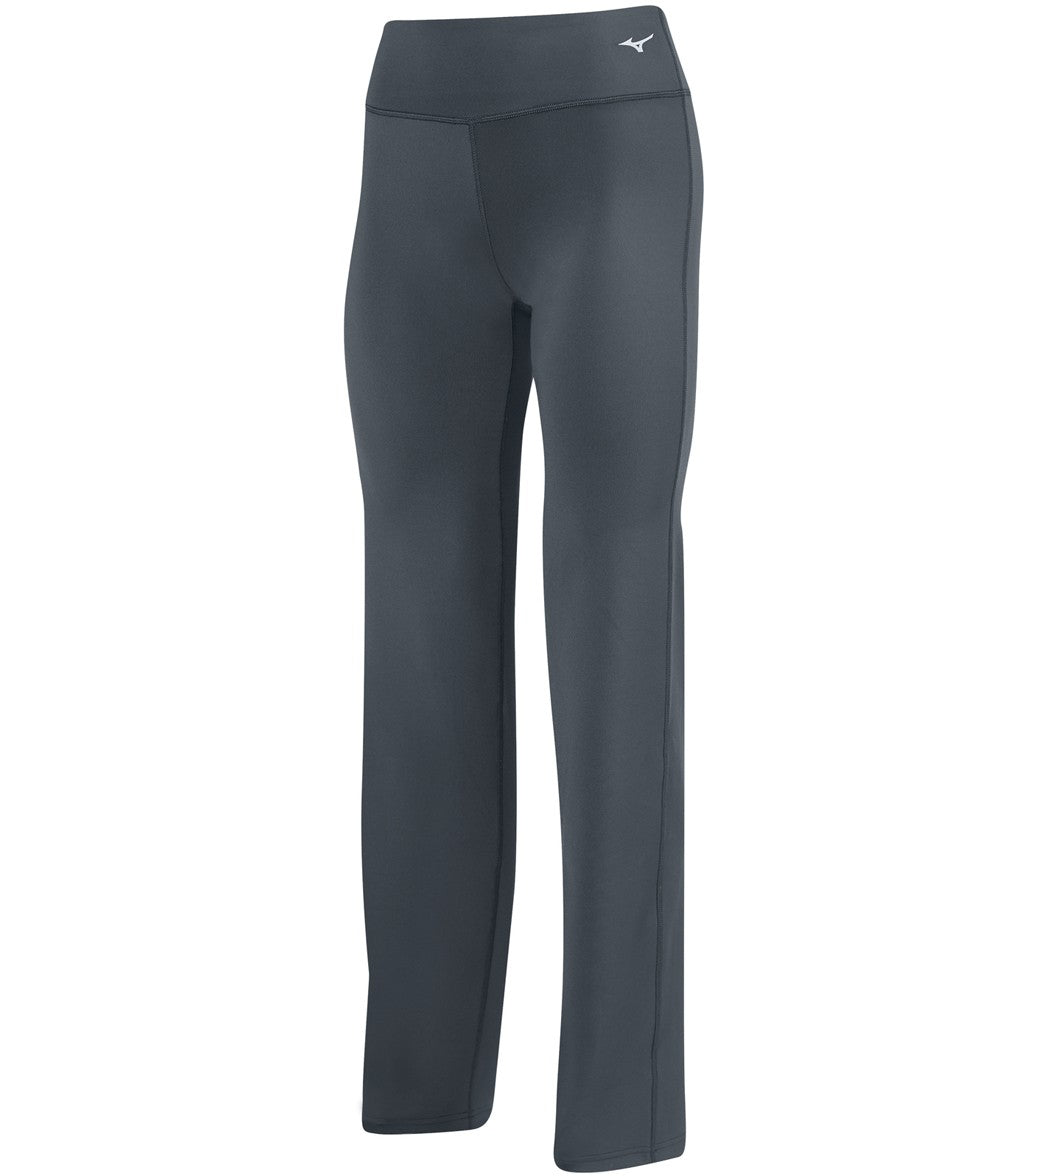 Mizuno Women's Align Long Volleyball Pants - Charcoal Large - Swimoutlet.com